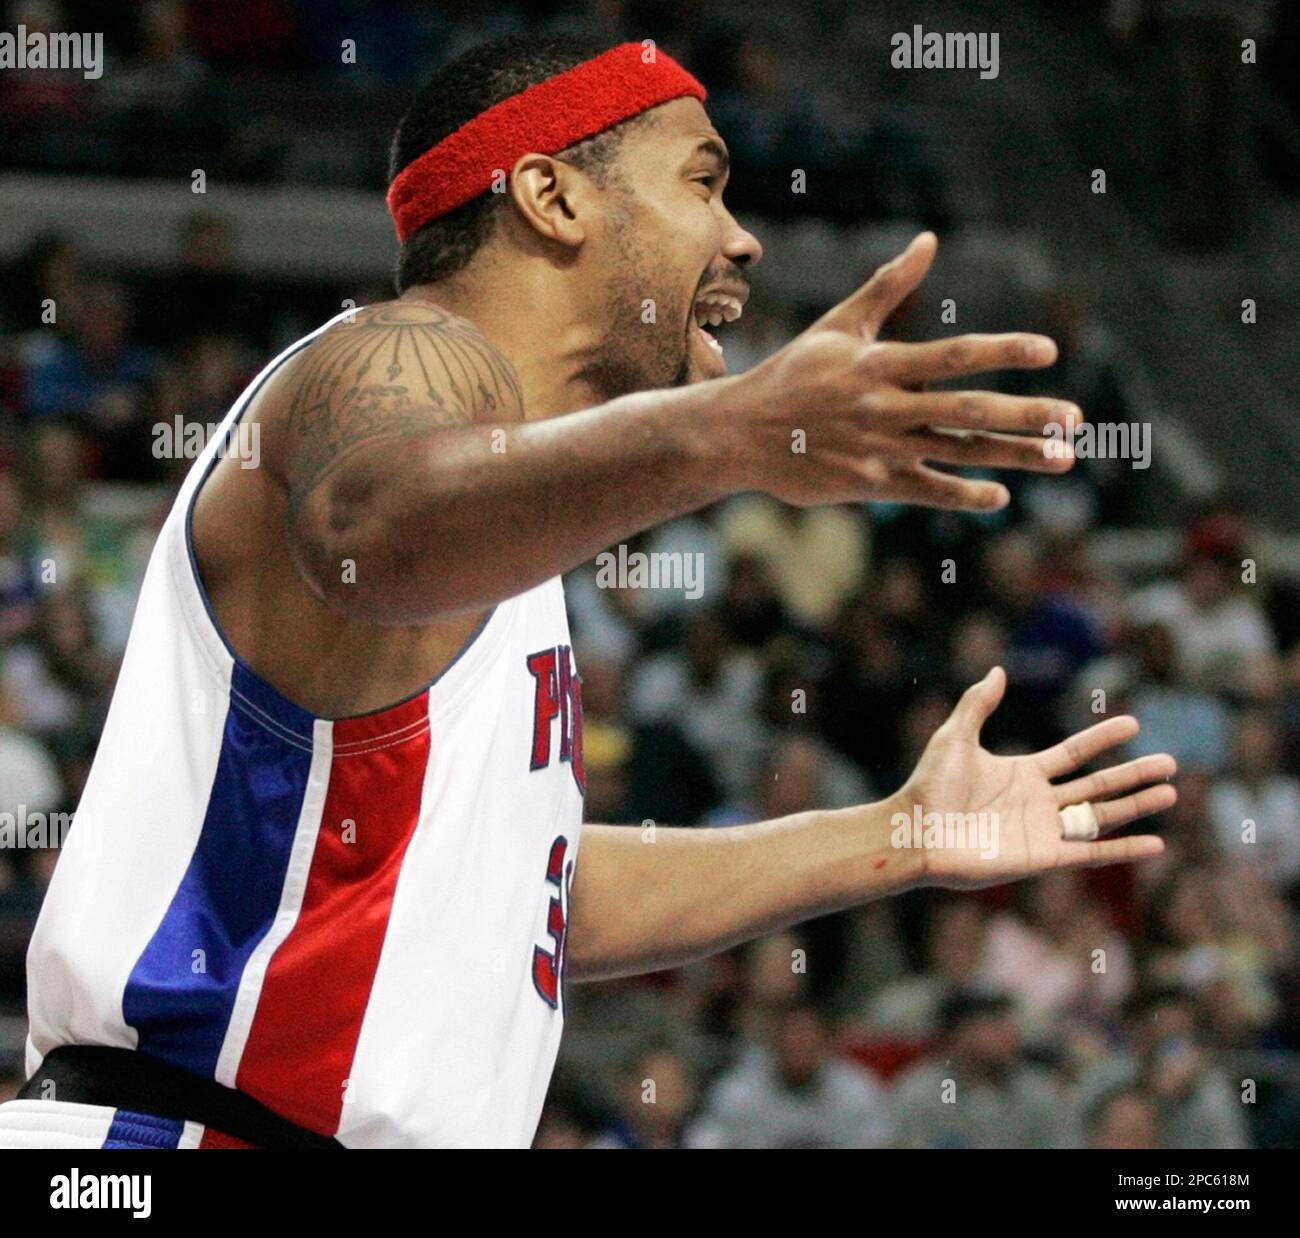 Detroit Pistons forward Rasheed Wallace argues a call and is whistled for a  technical foul in the fourth quarter of their basketball game against the New  Jersey Nets Tuesday, Dec. 26, 2006,